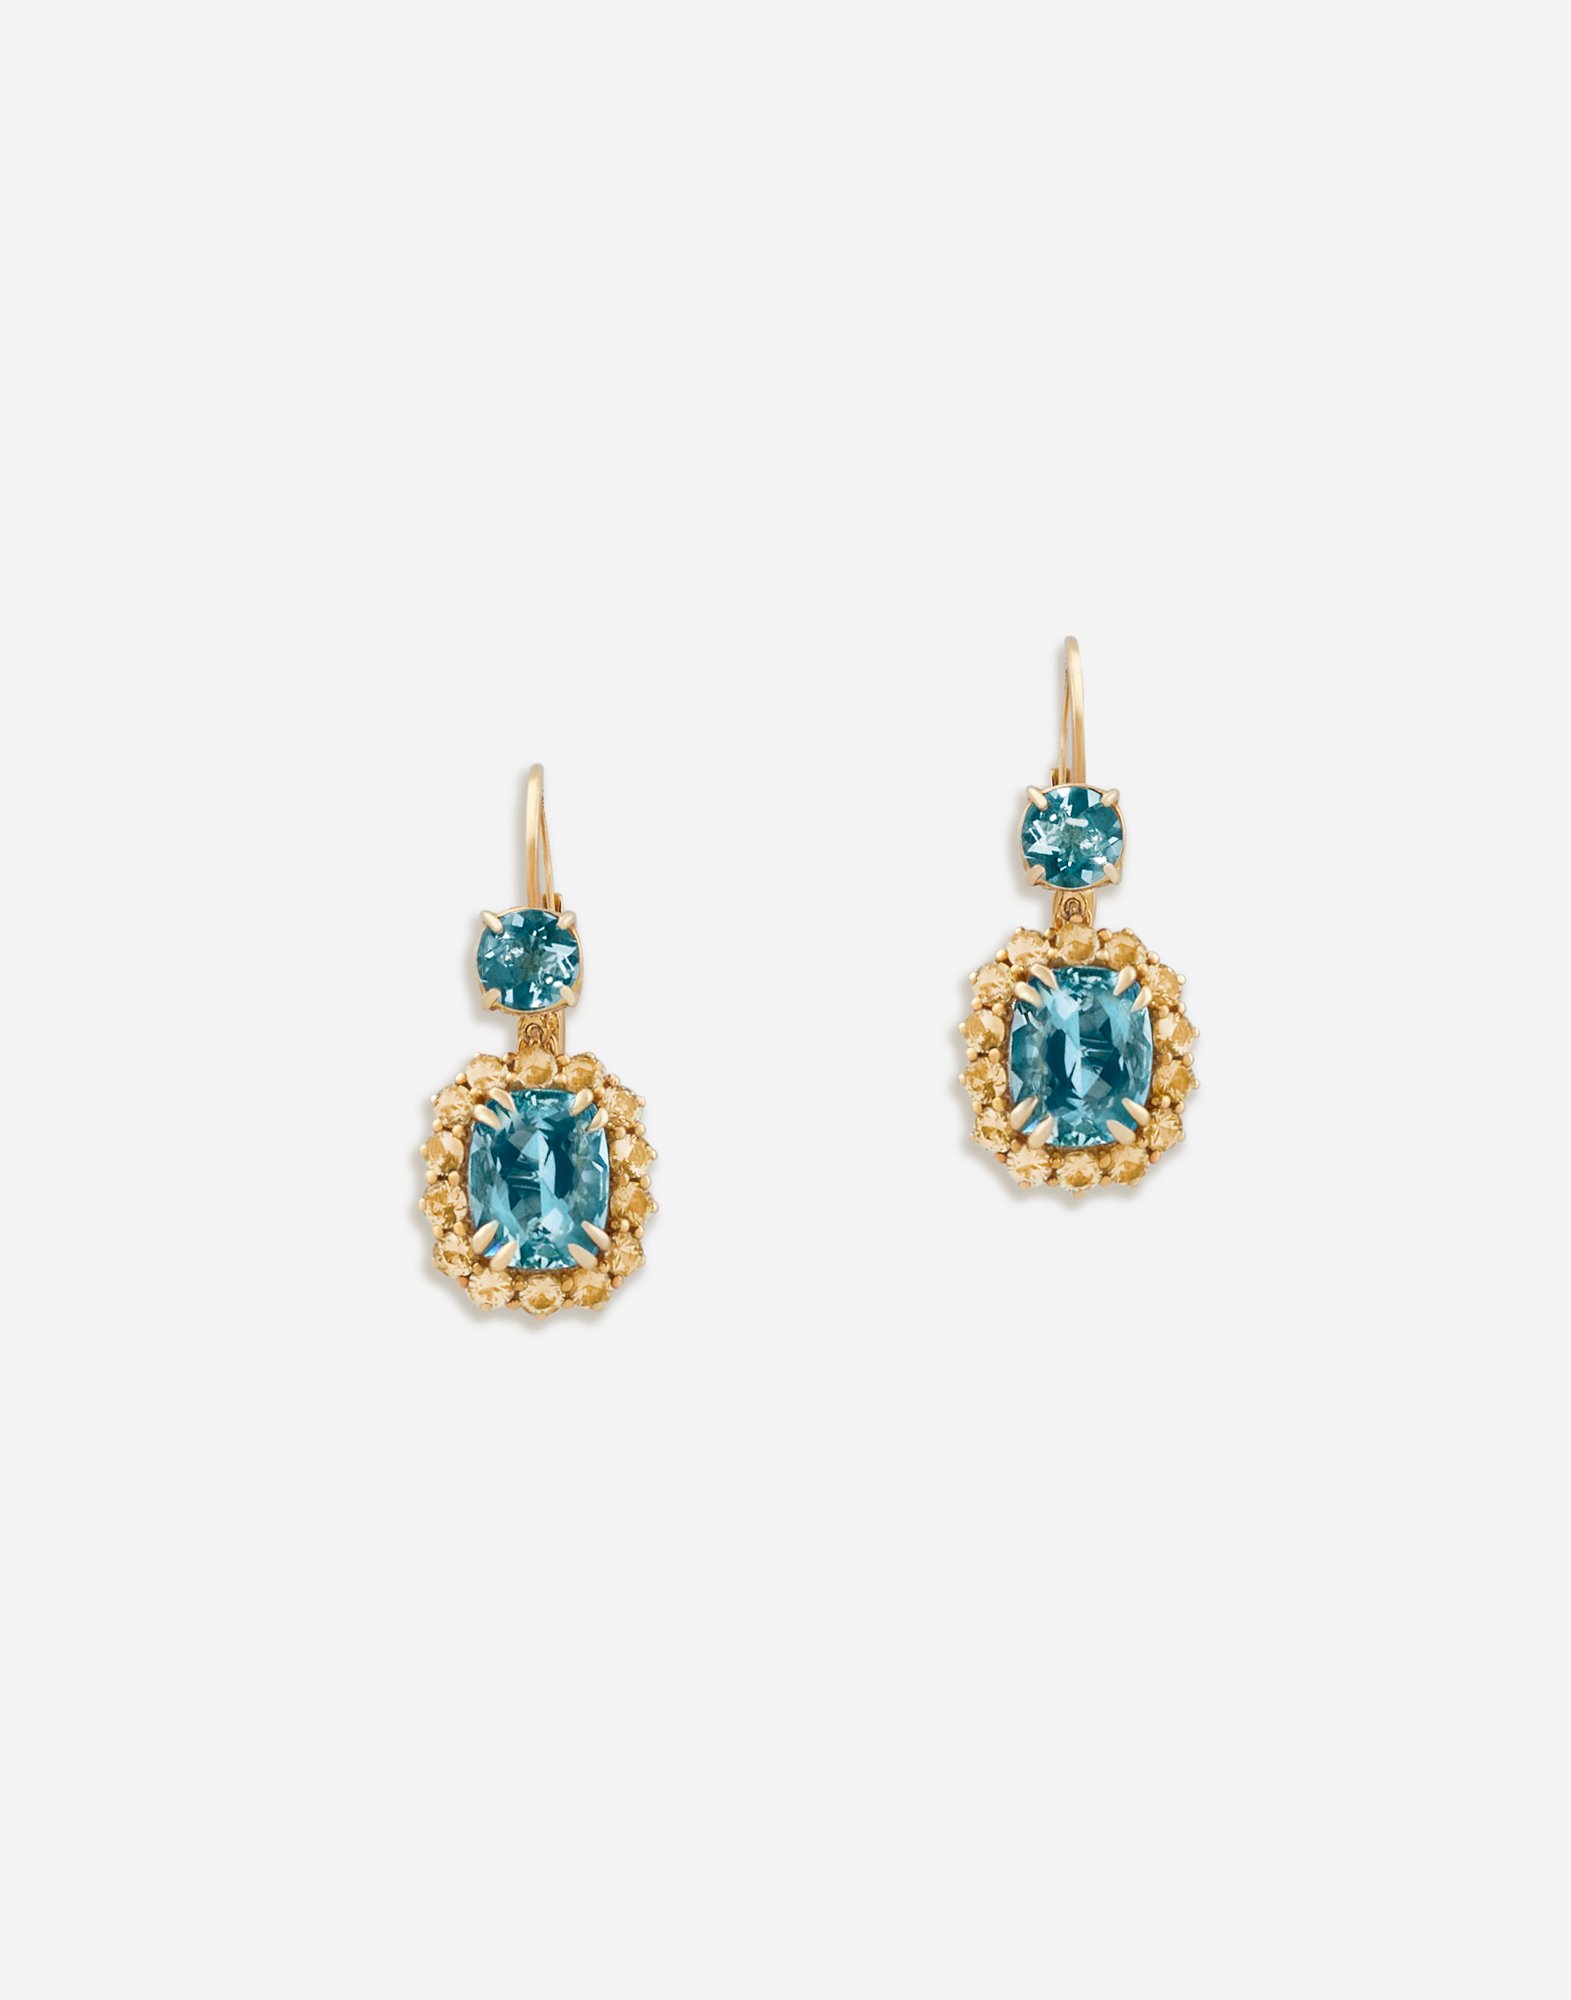 Dolce & Gabbana Herritage Earrings In Yellow Gold With Aquamarines And Yellow Sapphires